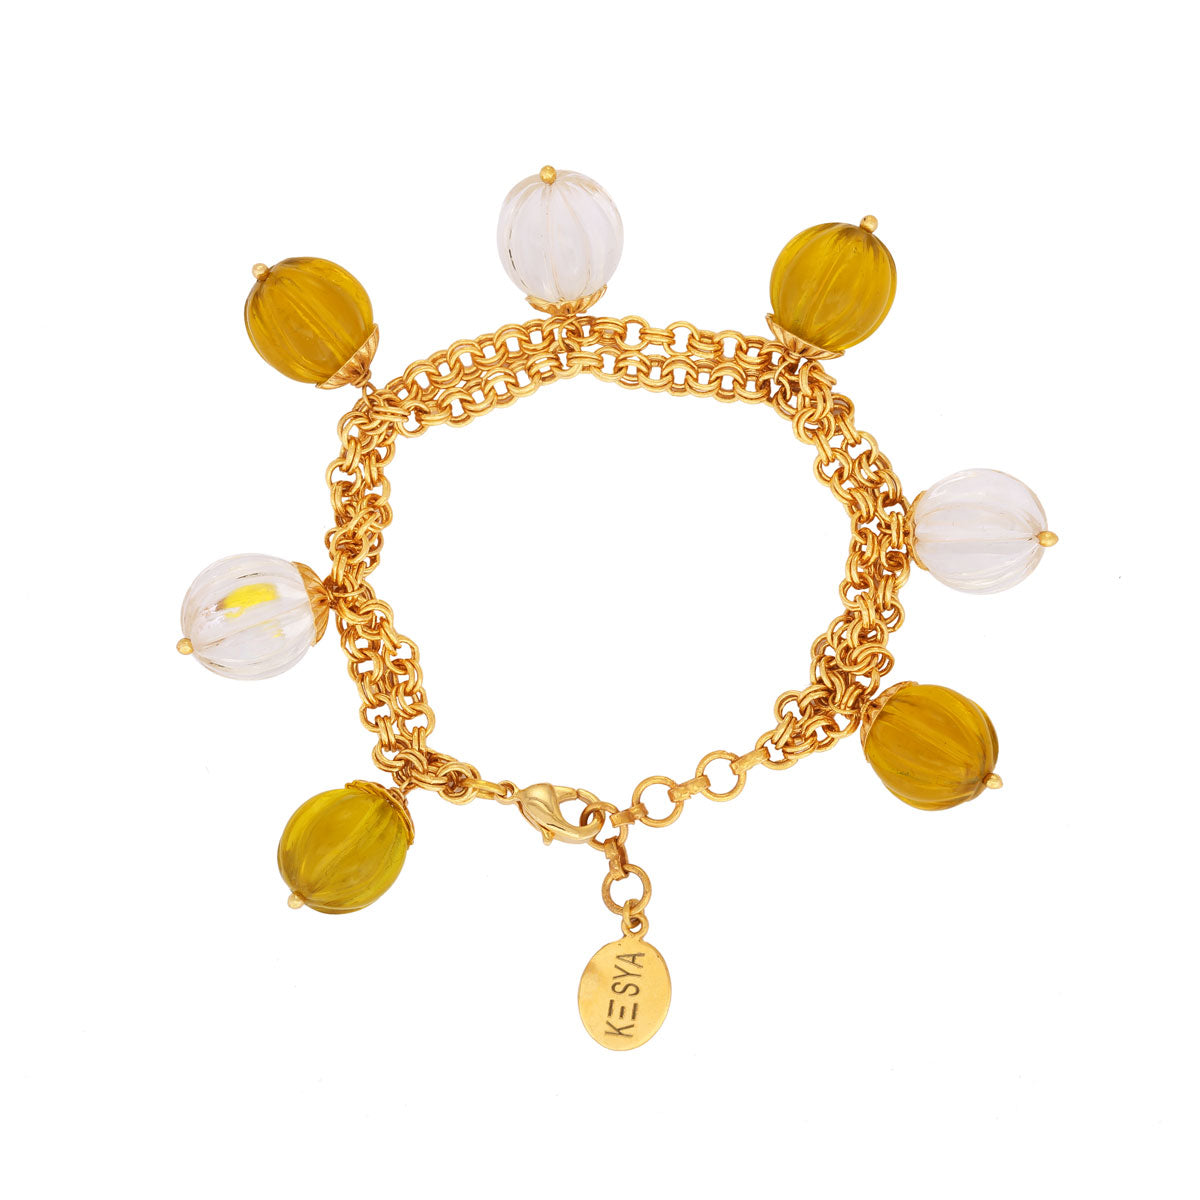 YELLOW AND CLEAR MELON BRACELETS